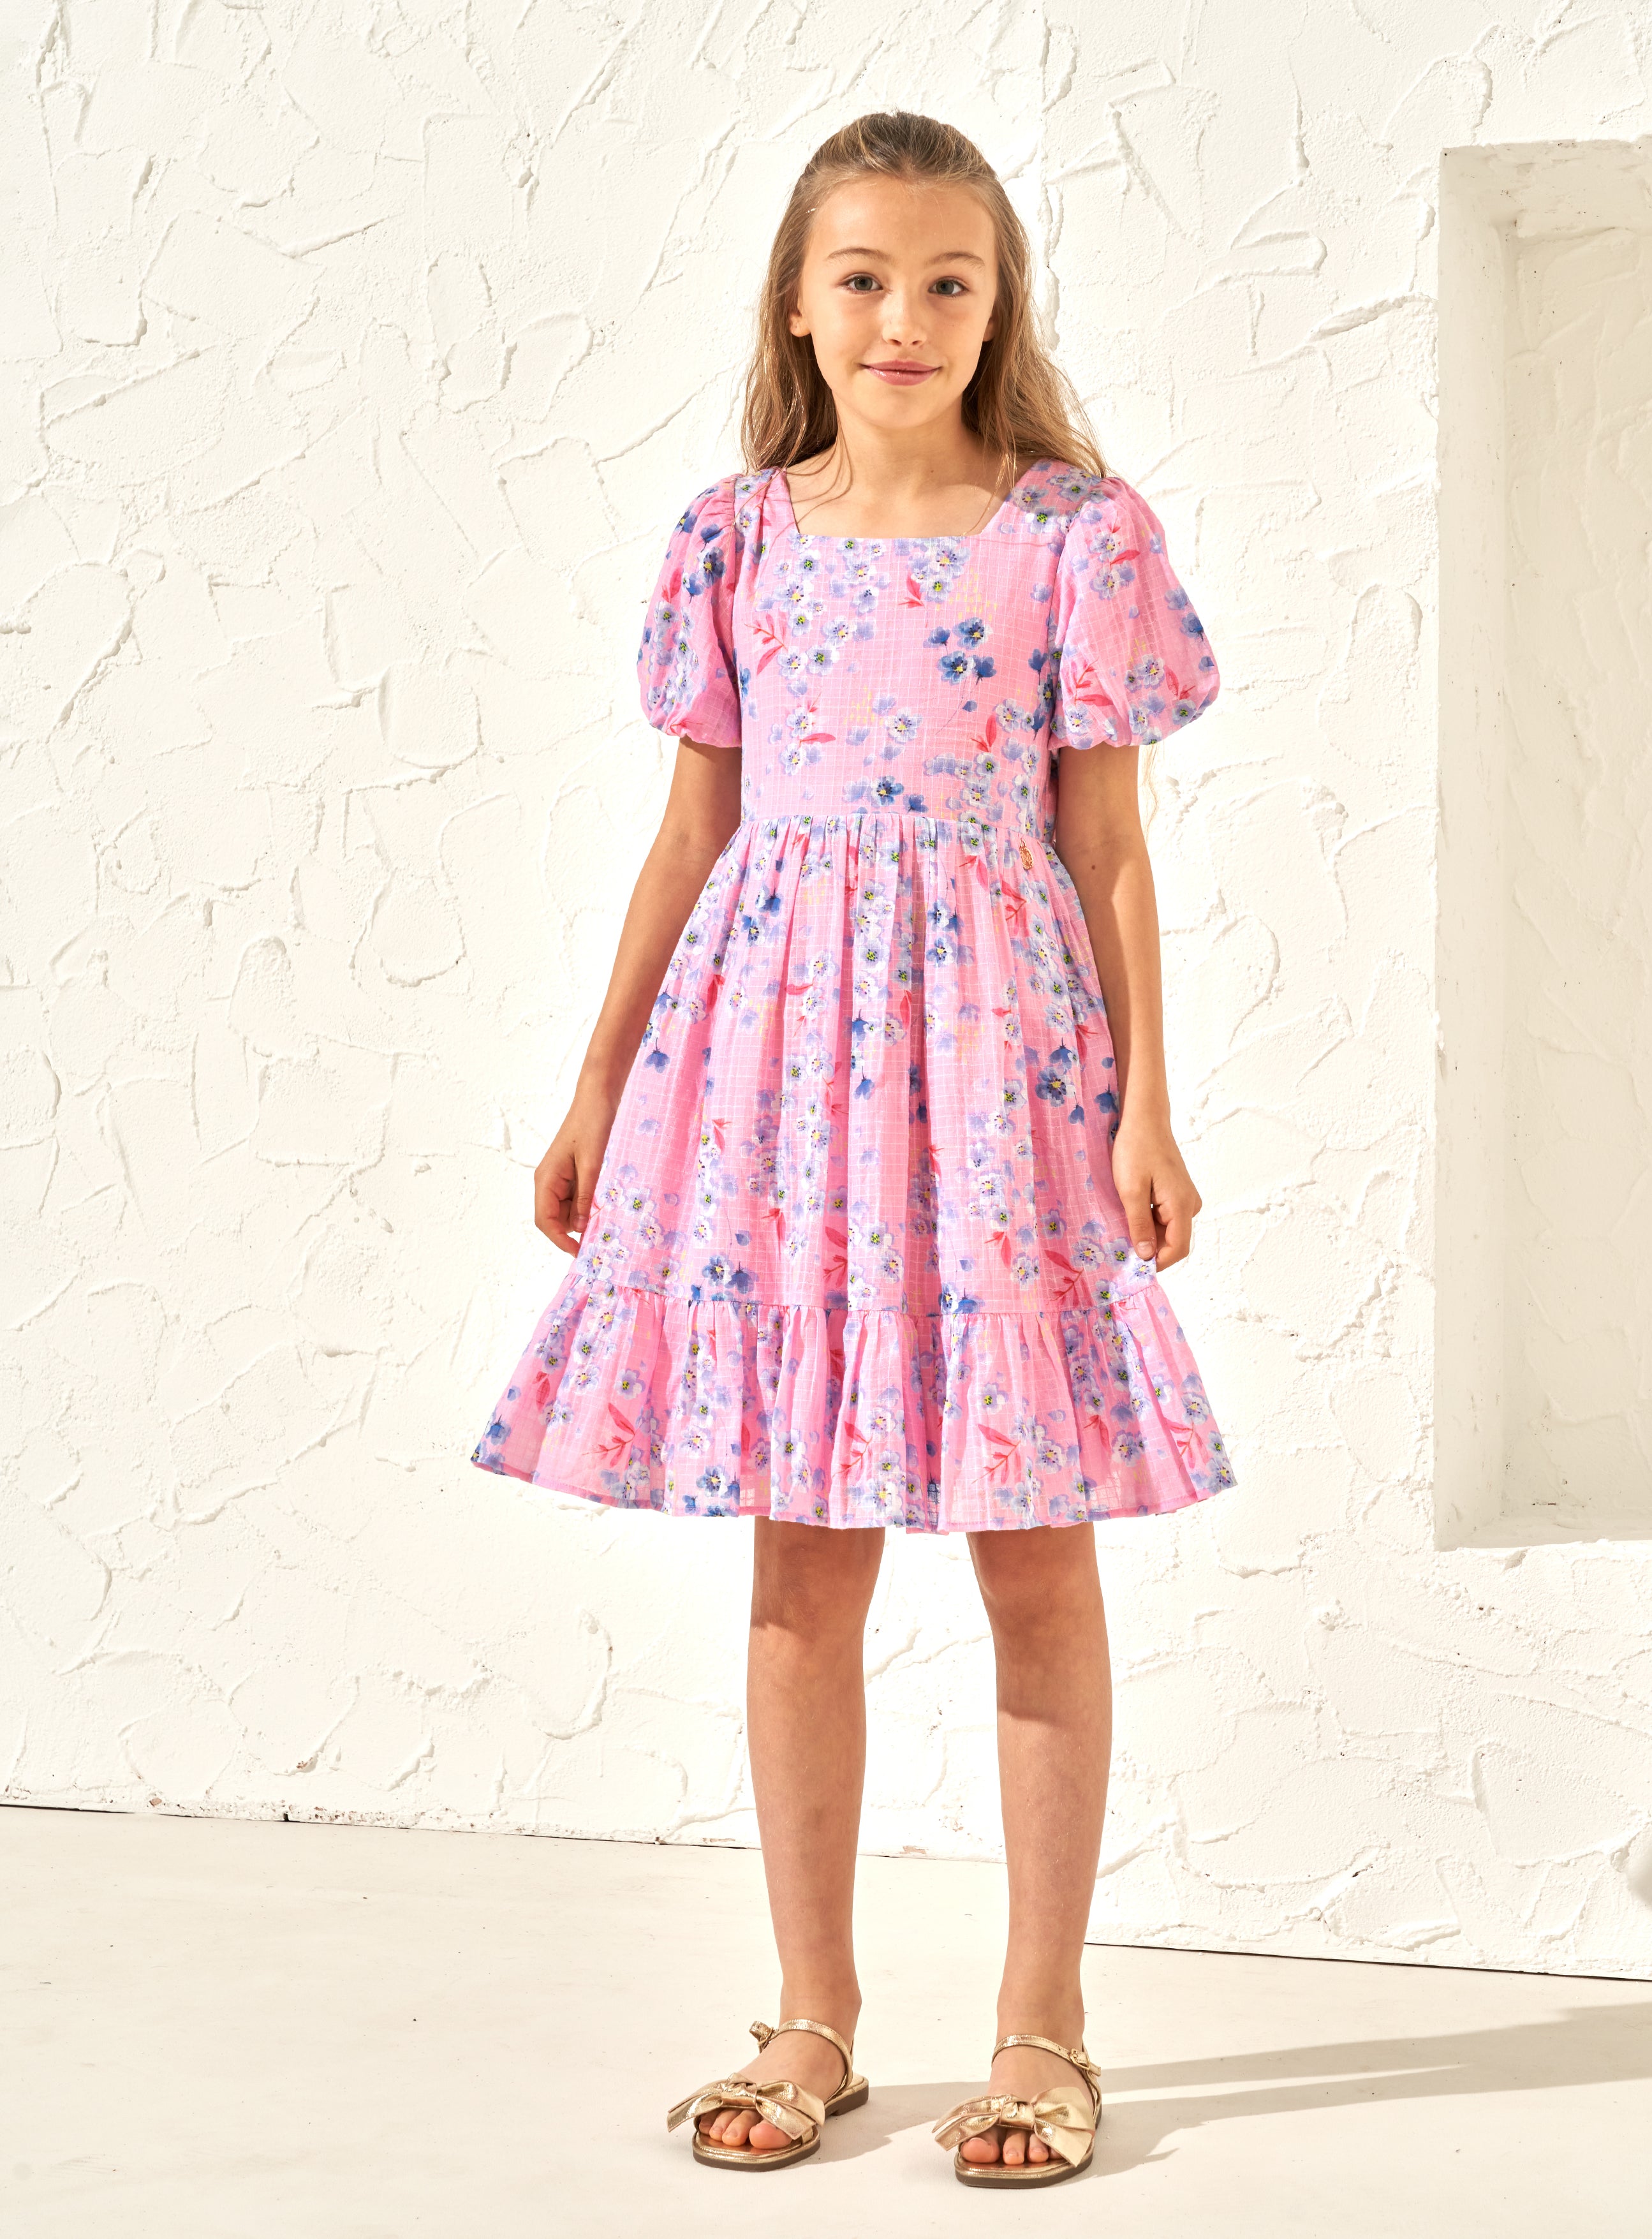 Girls Casual Cotton Pink Dress with Textured Print